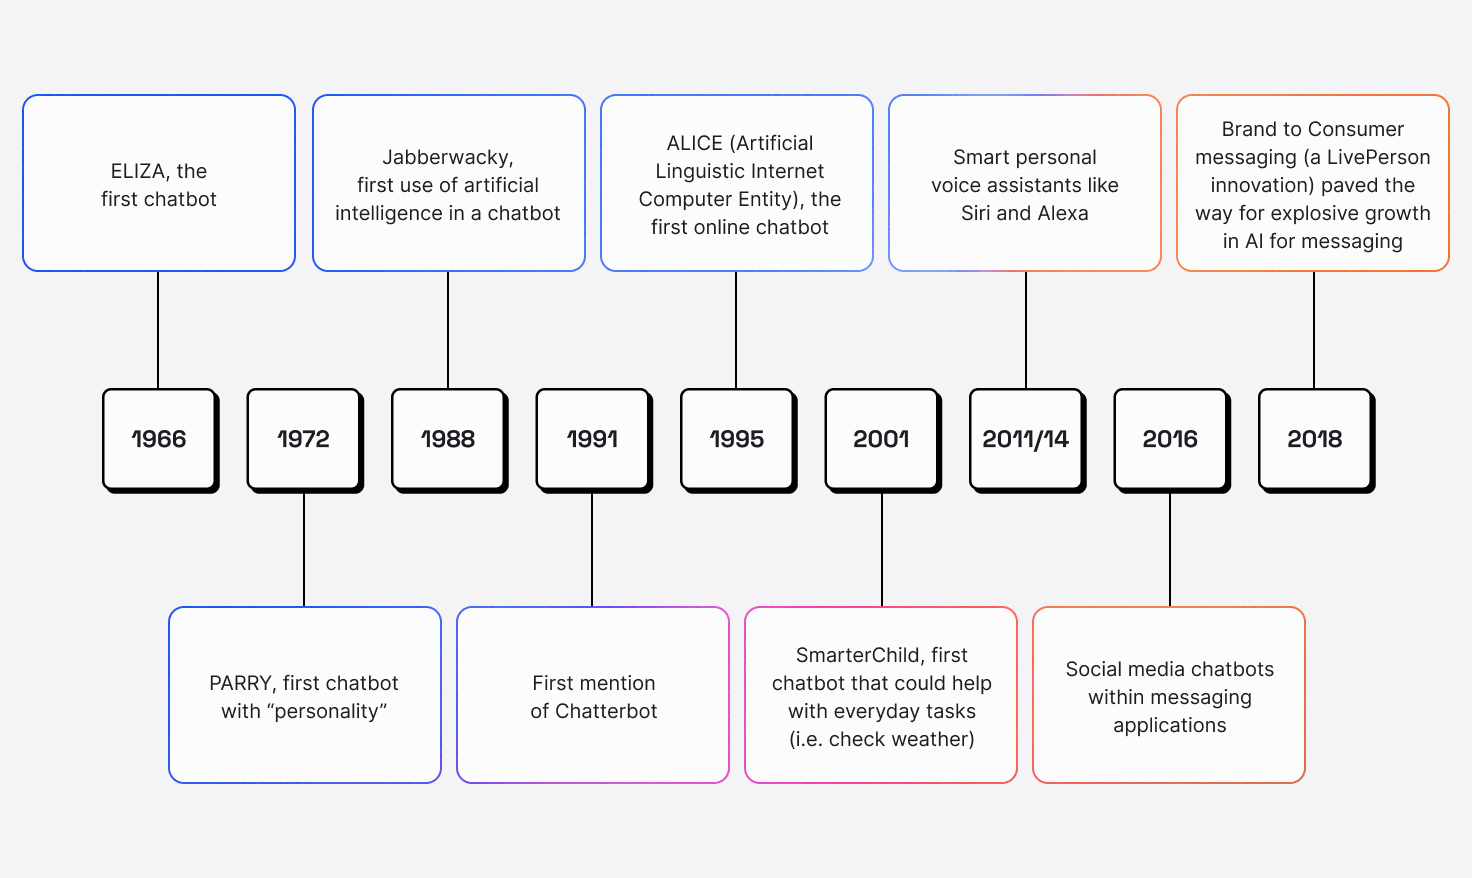 What is Conversational AI historical timeline, showing growth in natural language understanding and natural language processing